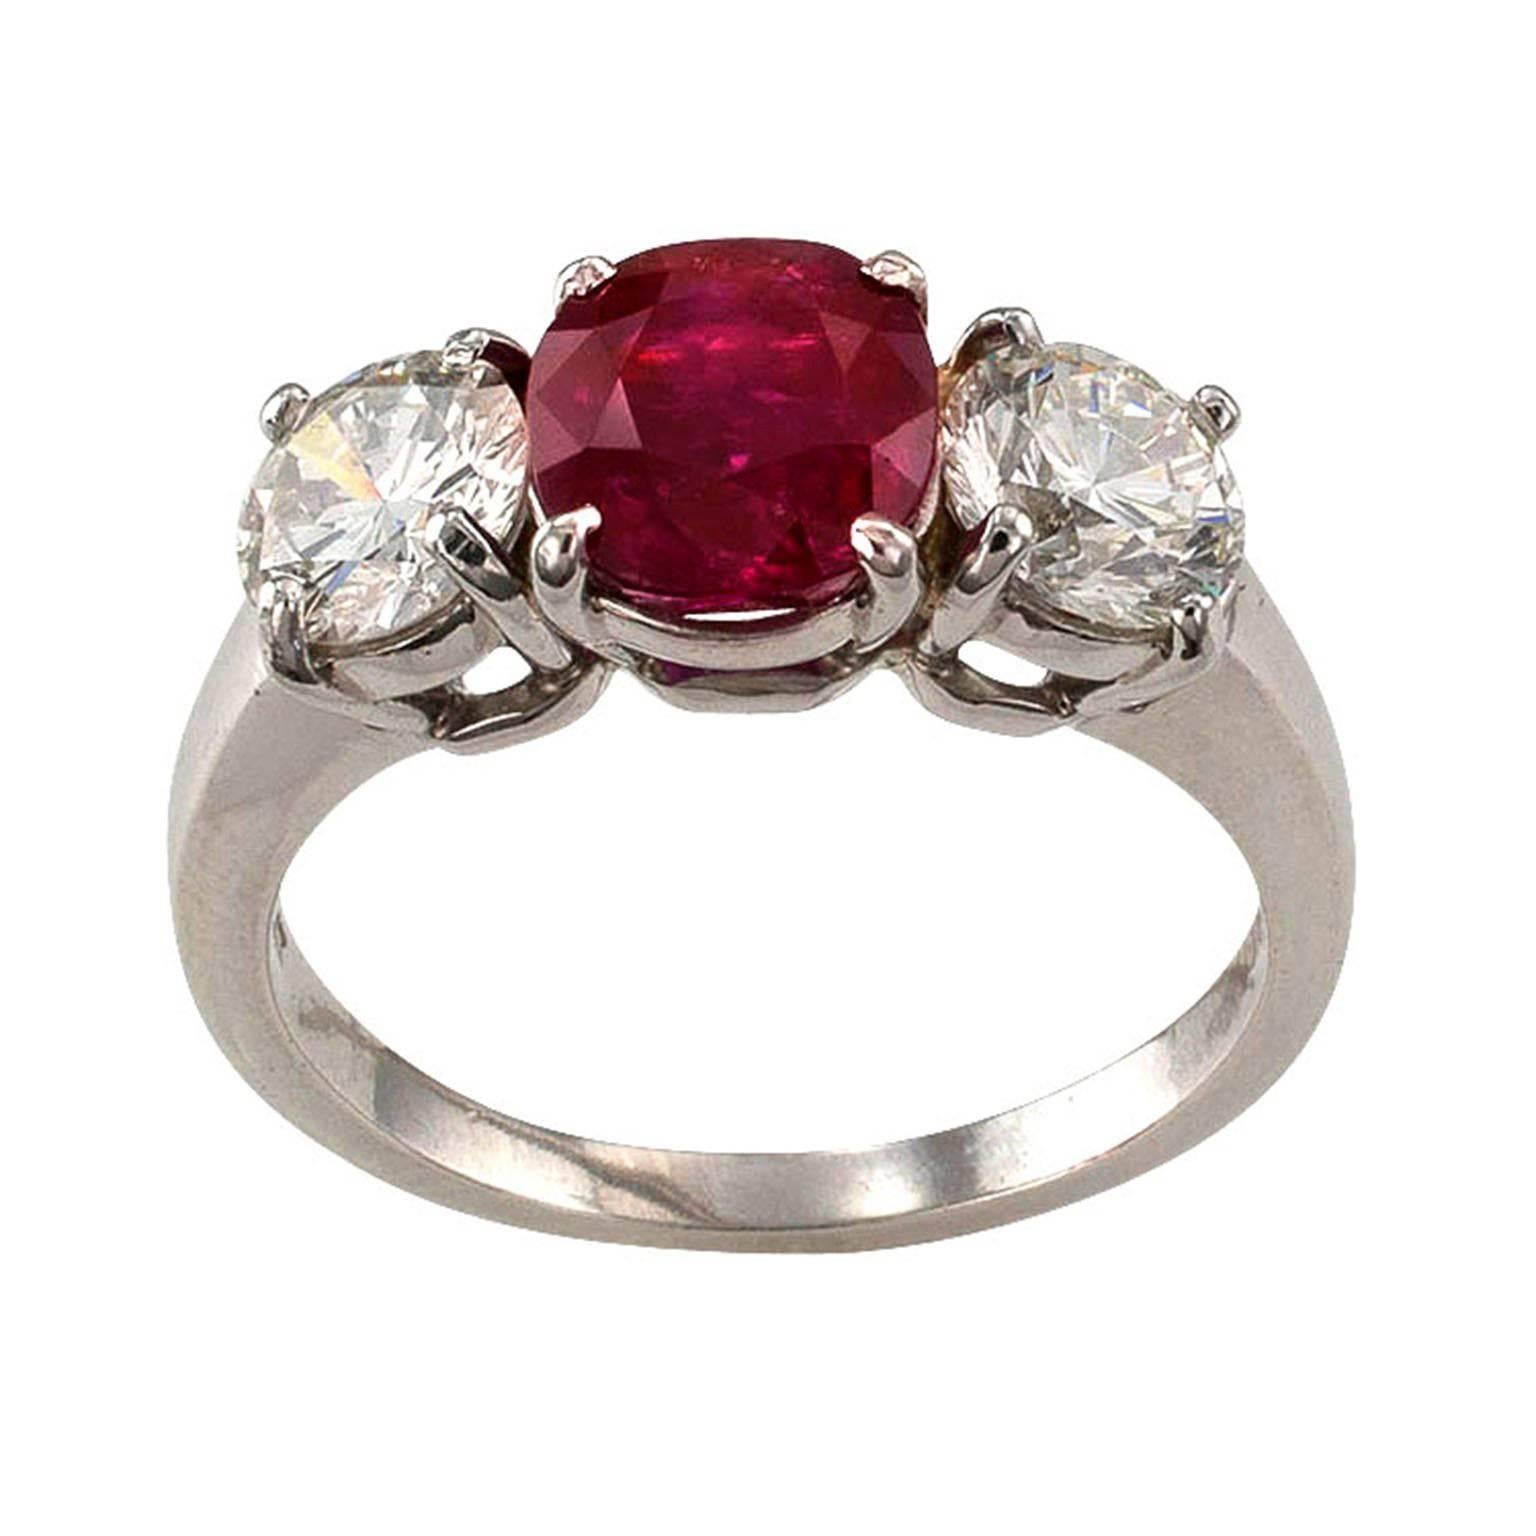 Unheated Burma Ruby and Diamond Three-Stone Ring

It doesn't get any more traditional than a simple three-stone platinum ring, as a rule, inherently beautiful. But things get even more exciting when that same three-stone ring becomes the vehicle for